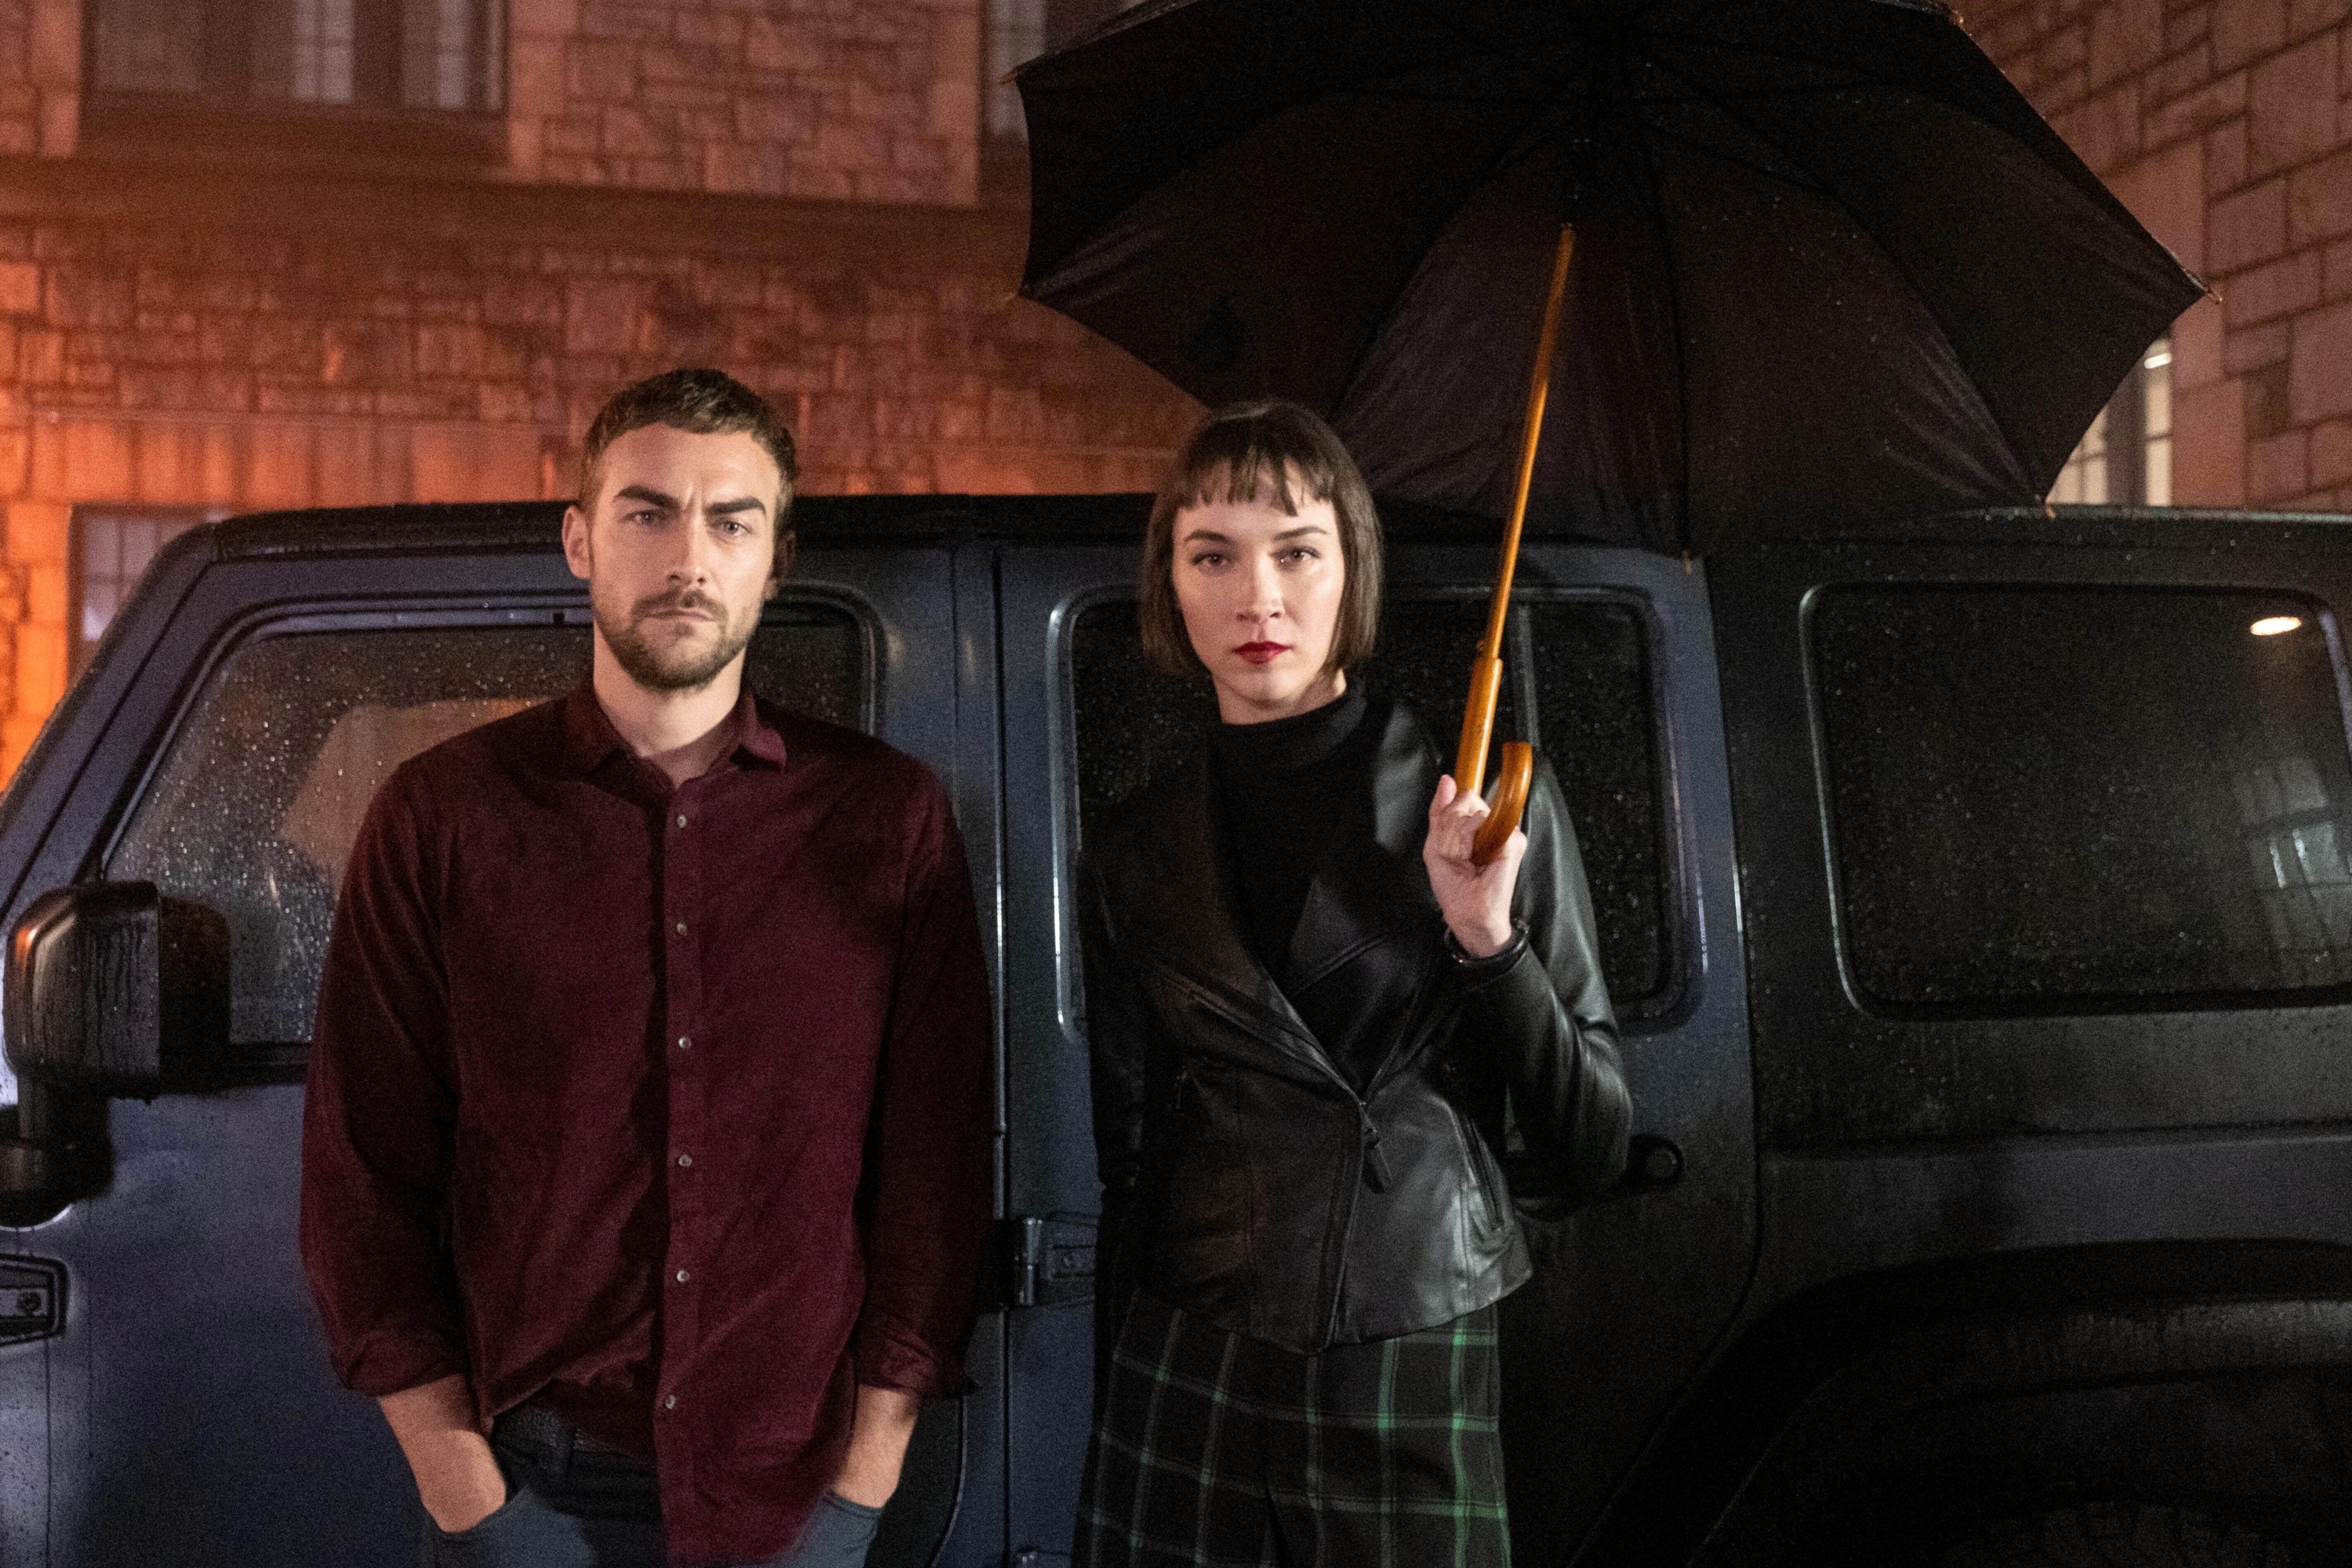 The Helstrom Siblings put out a creepy vibe in &quot;Helstrom&quot;